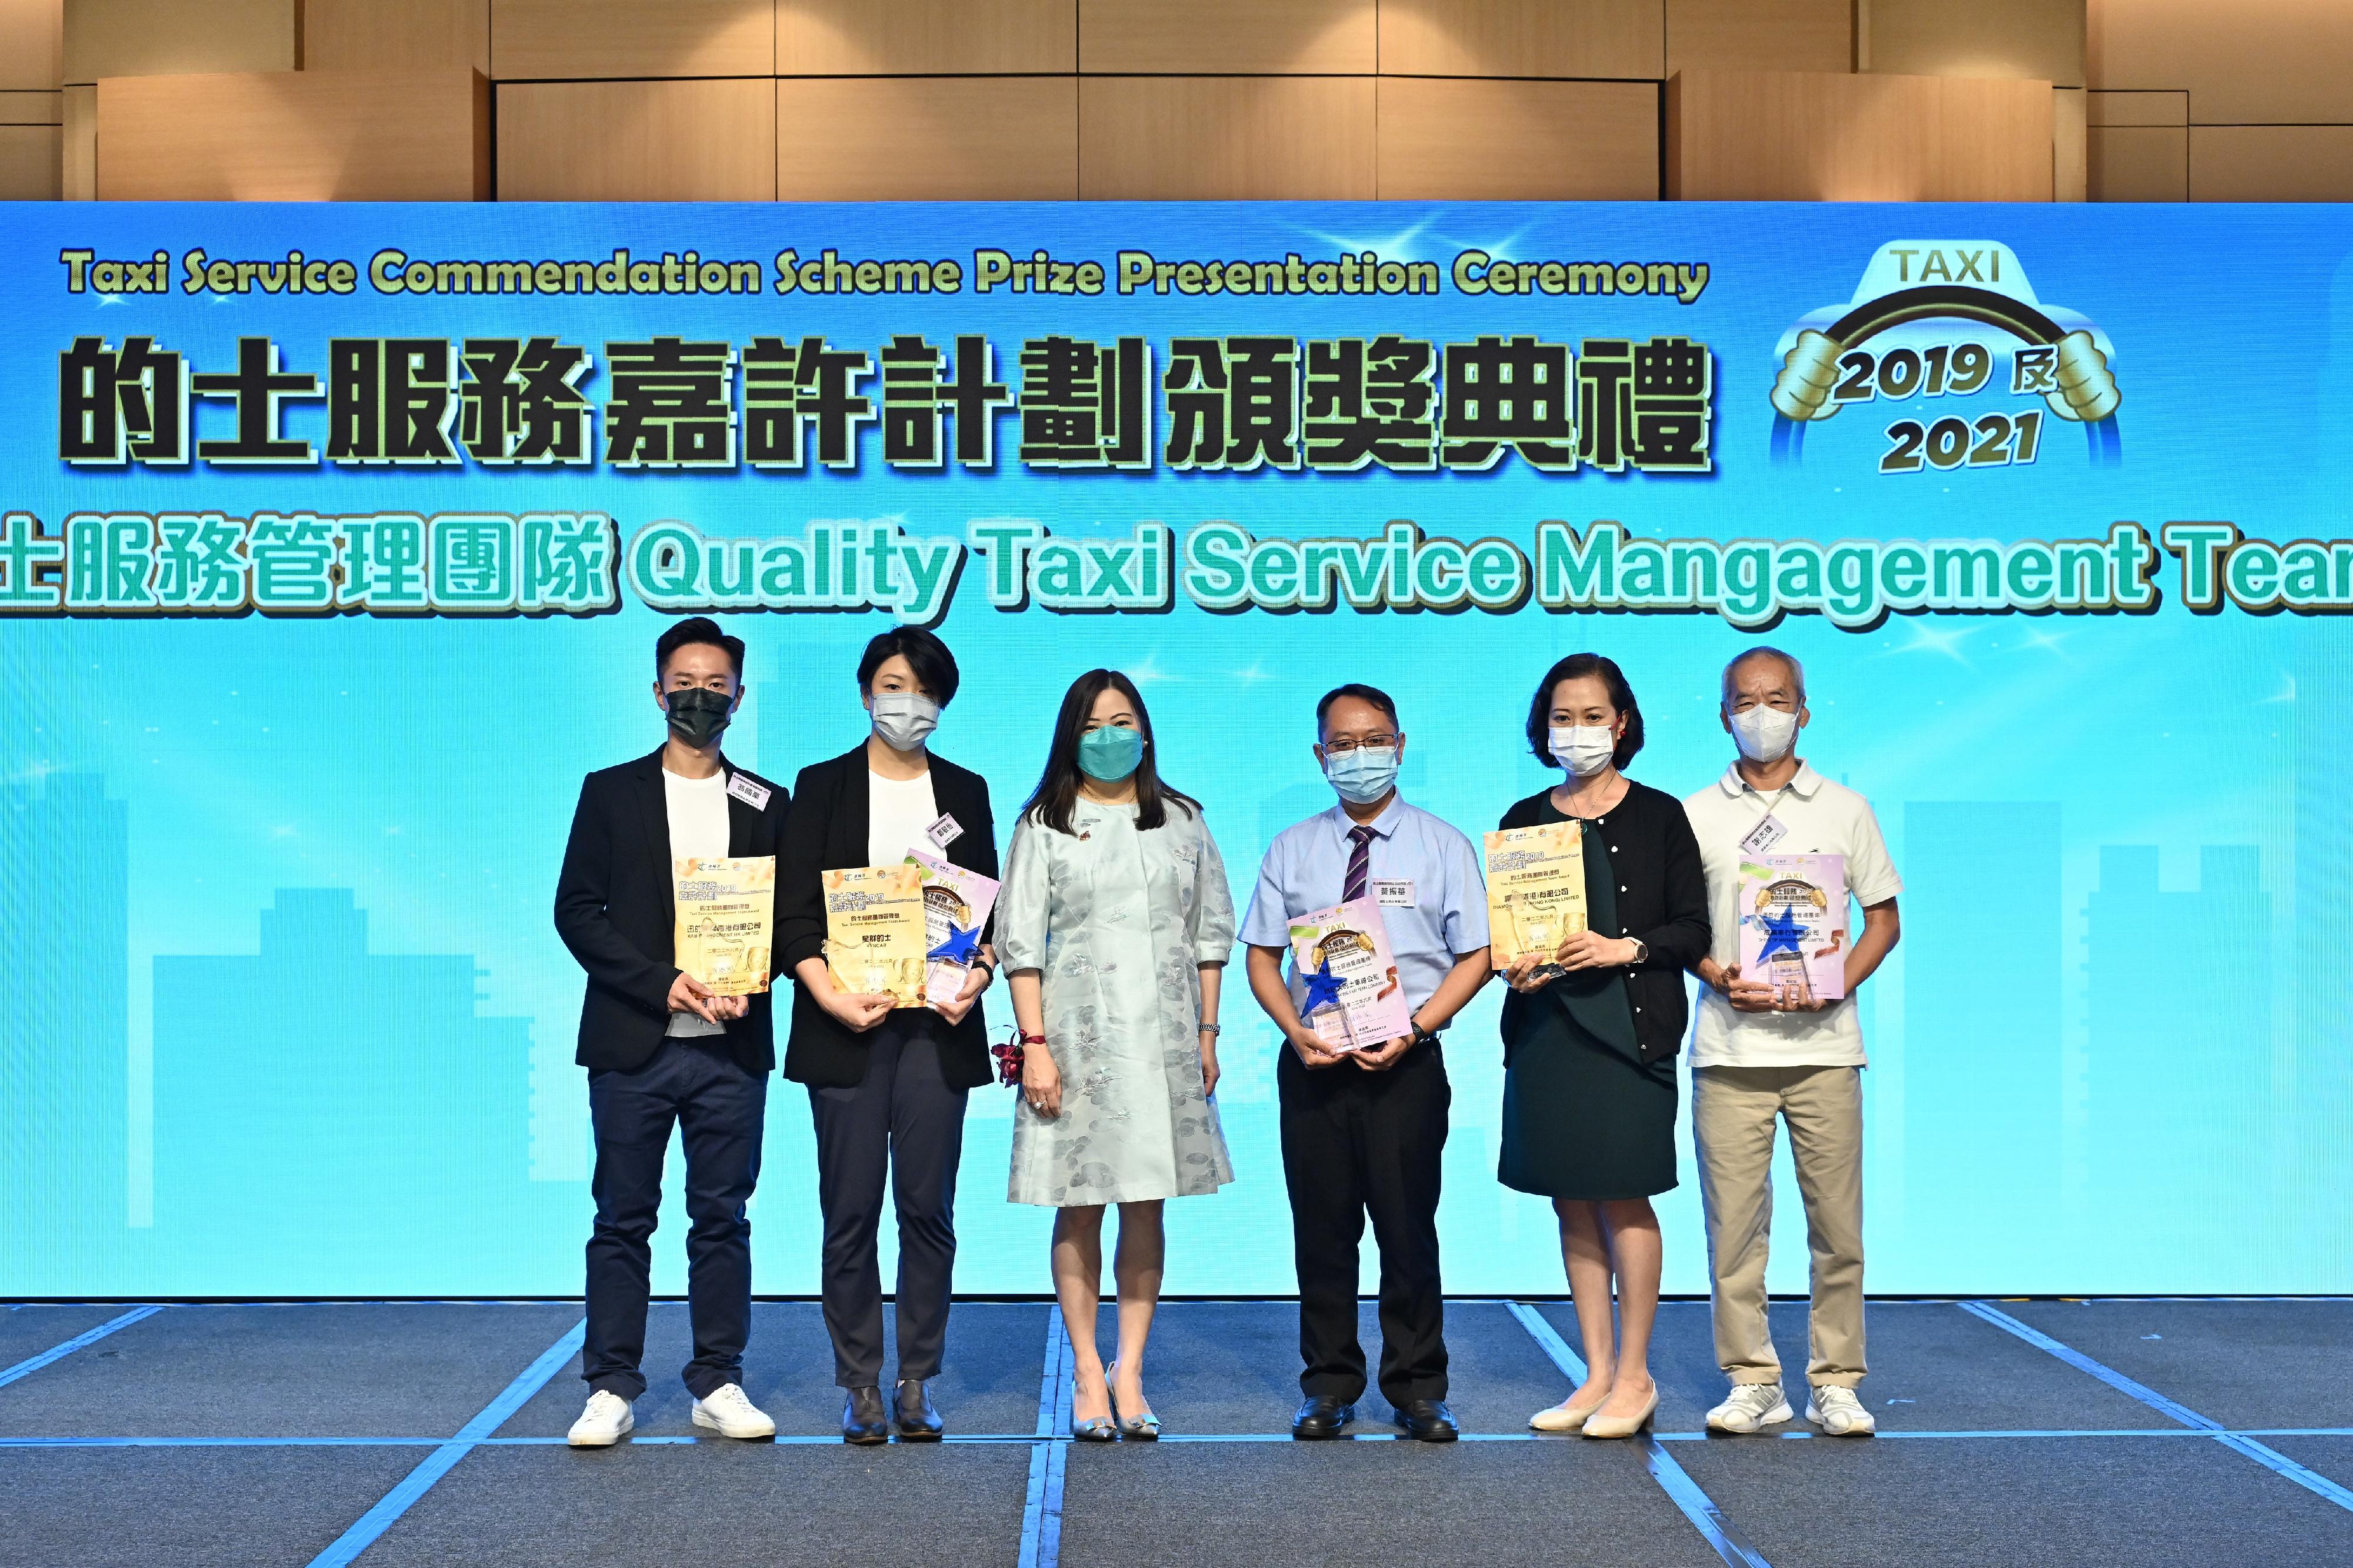 The prize presentation ceremony for the Taxi Service Commendation Scheme 2019 and 2021 was held today (June 24). The Committee on Taxi Service Quality Chairman and the Commissioner for Transport, Miss Rosanna Law (third left), is pictured with "Quality Taxi Service Management Teams" awardees of 2019 and 2021 at the ceremony.